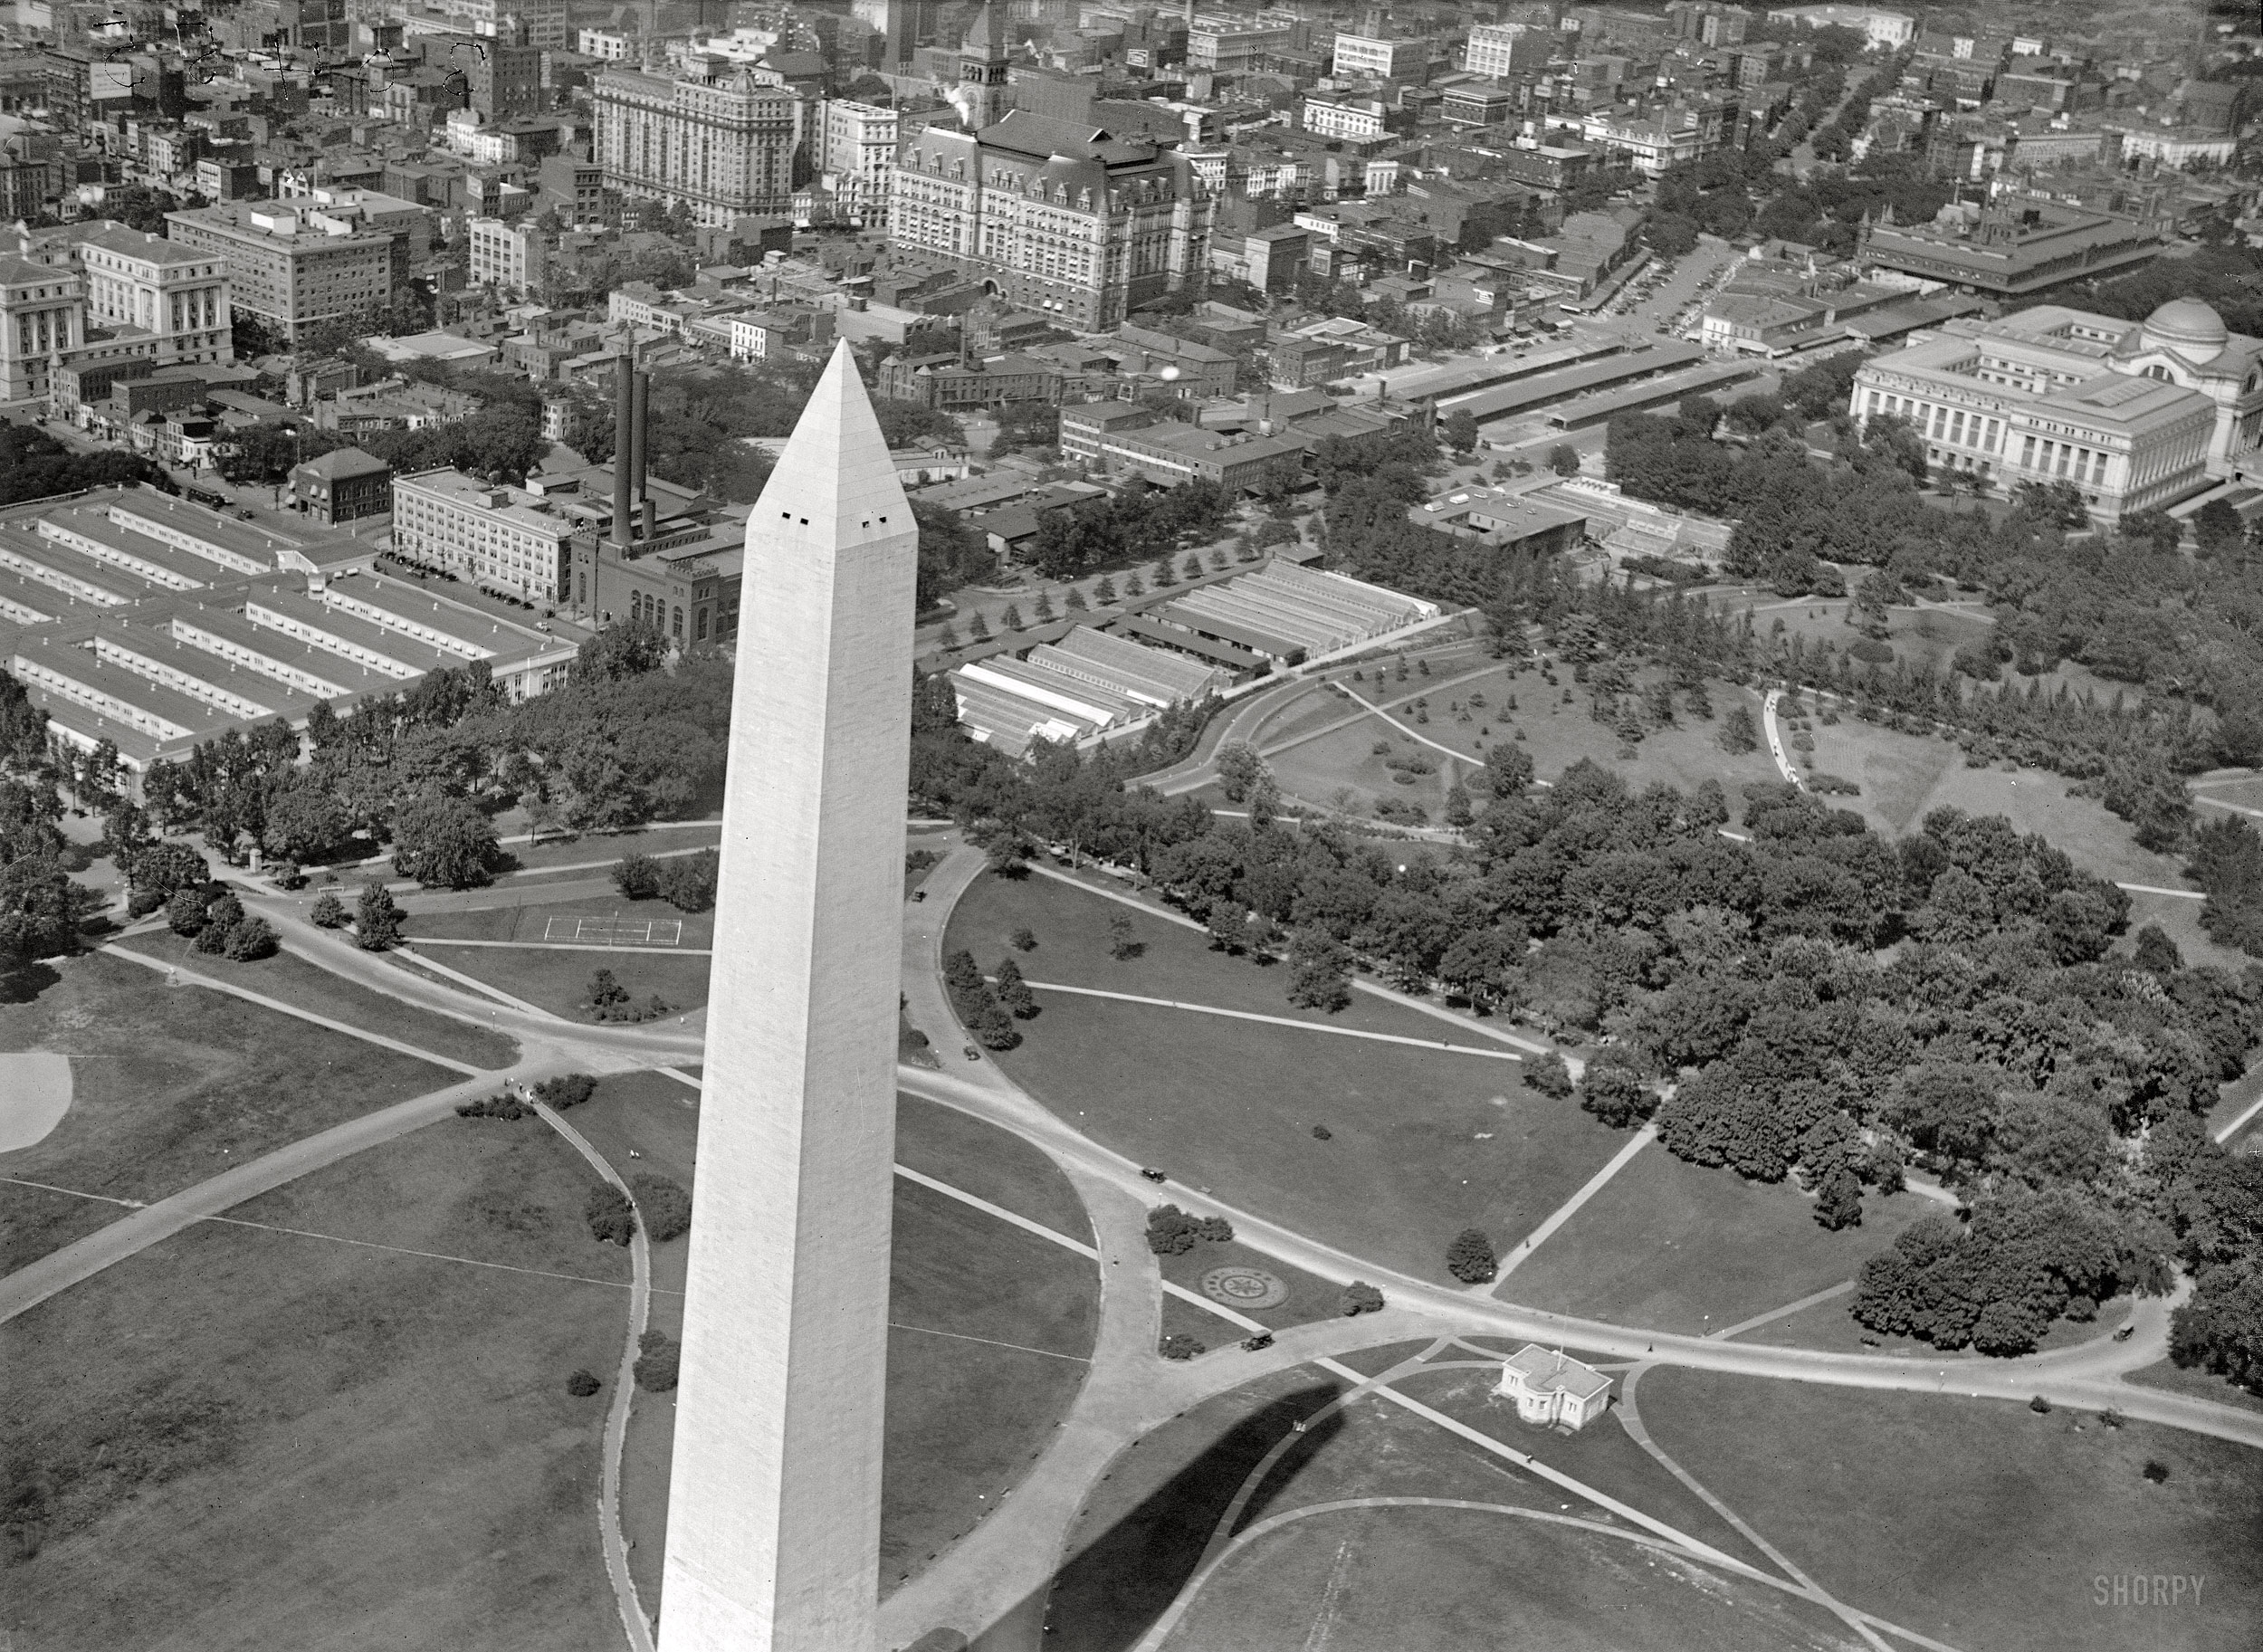 1919. "National Museum, air view from Washington Monument." The Smithsonian Institution's National Museum of Natural History (domed building at right) nine years after its completion. Harris & Ewing Collection. View full size.